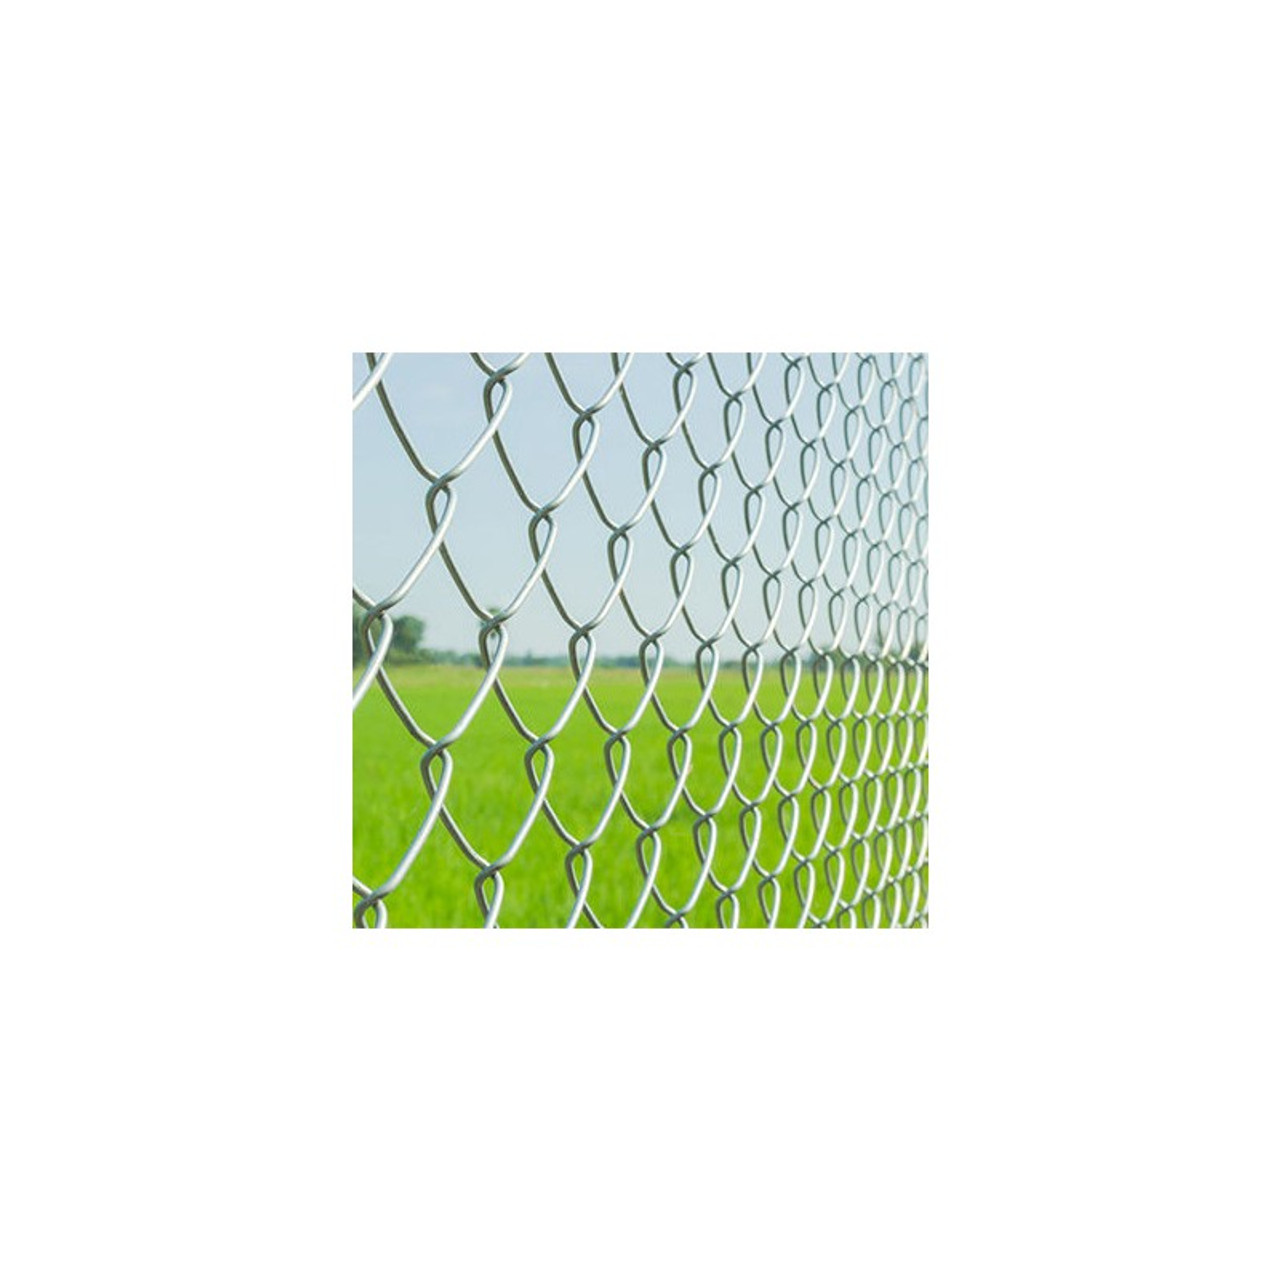 Buy Online Galvanized Chain Link Fence Hellog